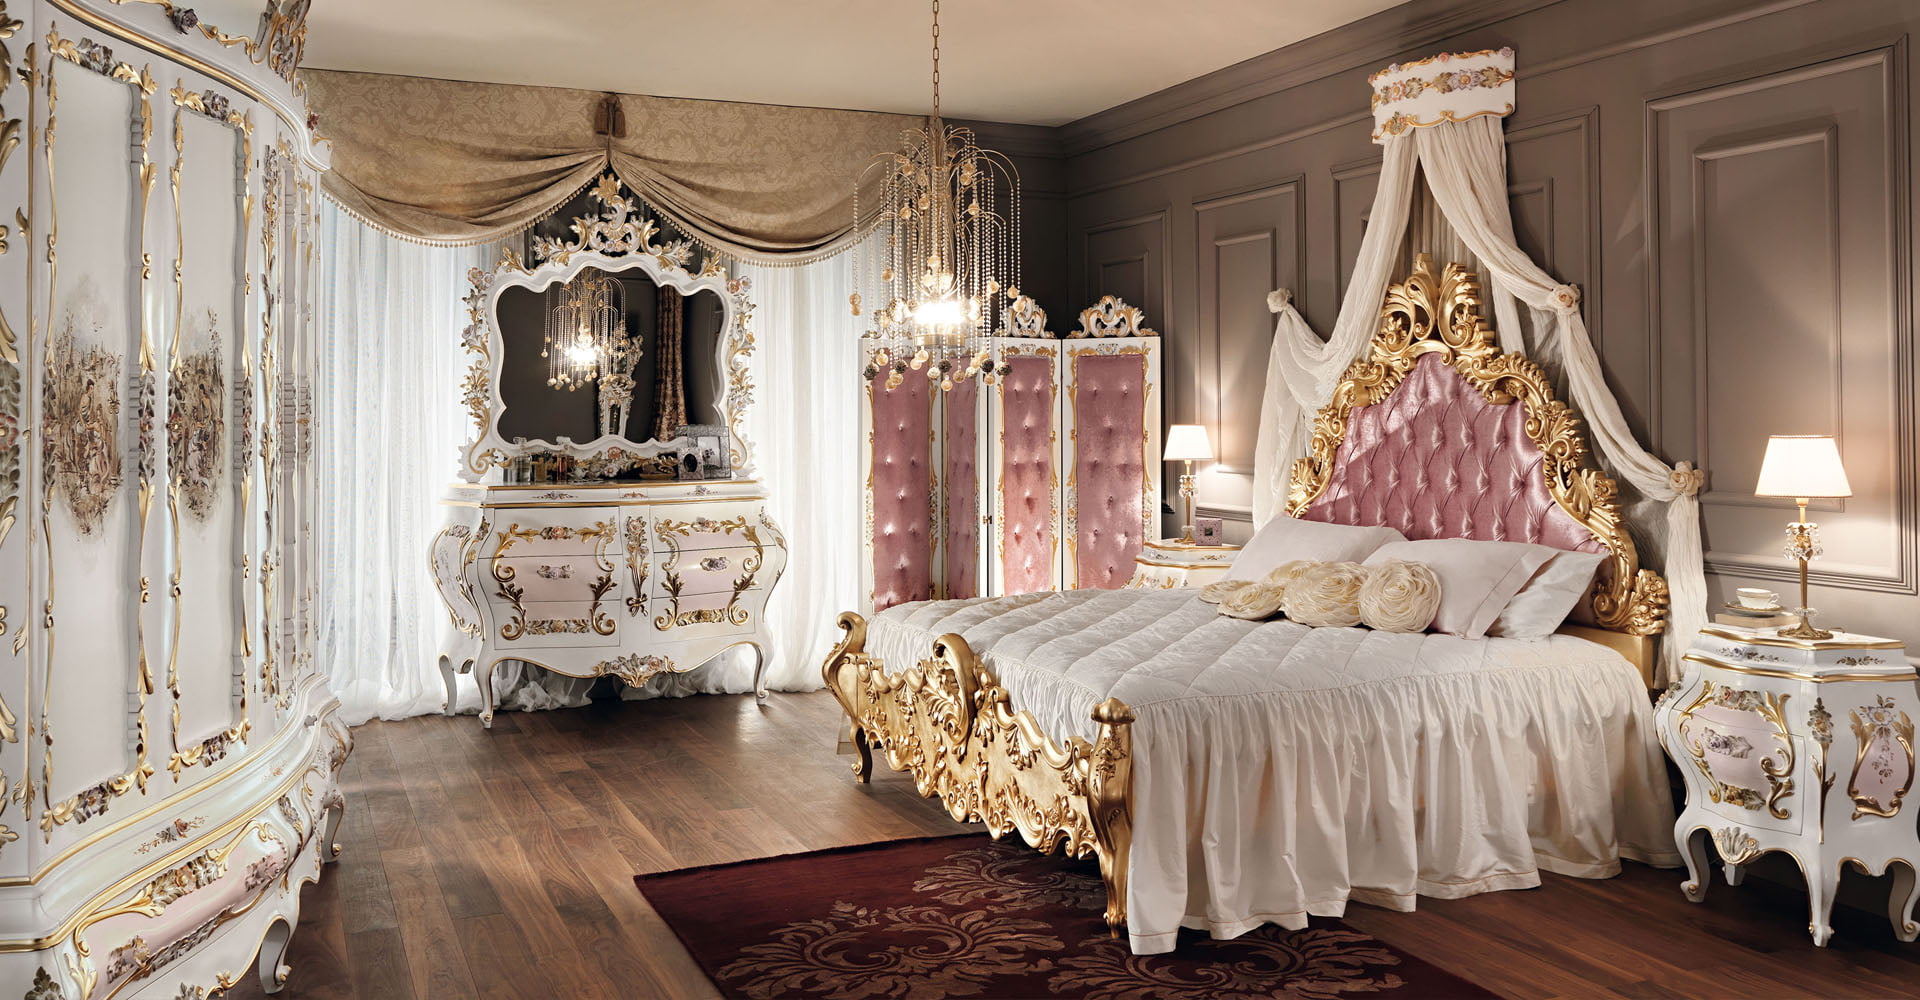 9. A baroque bedroom is suitable for a princess